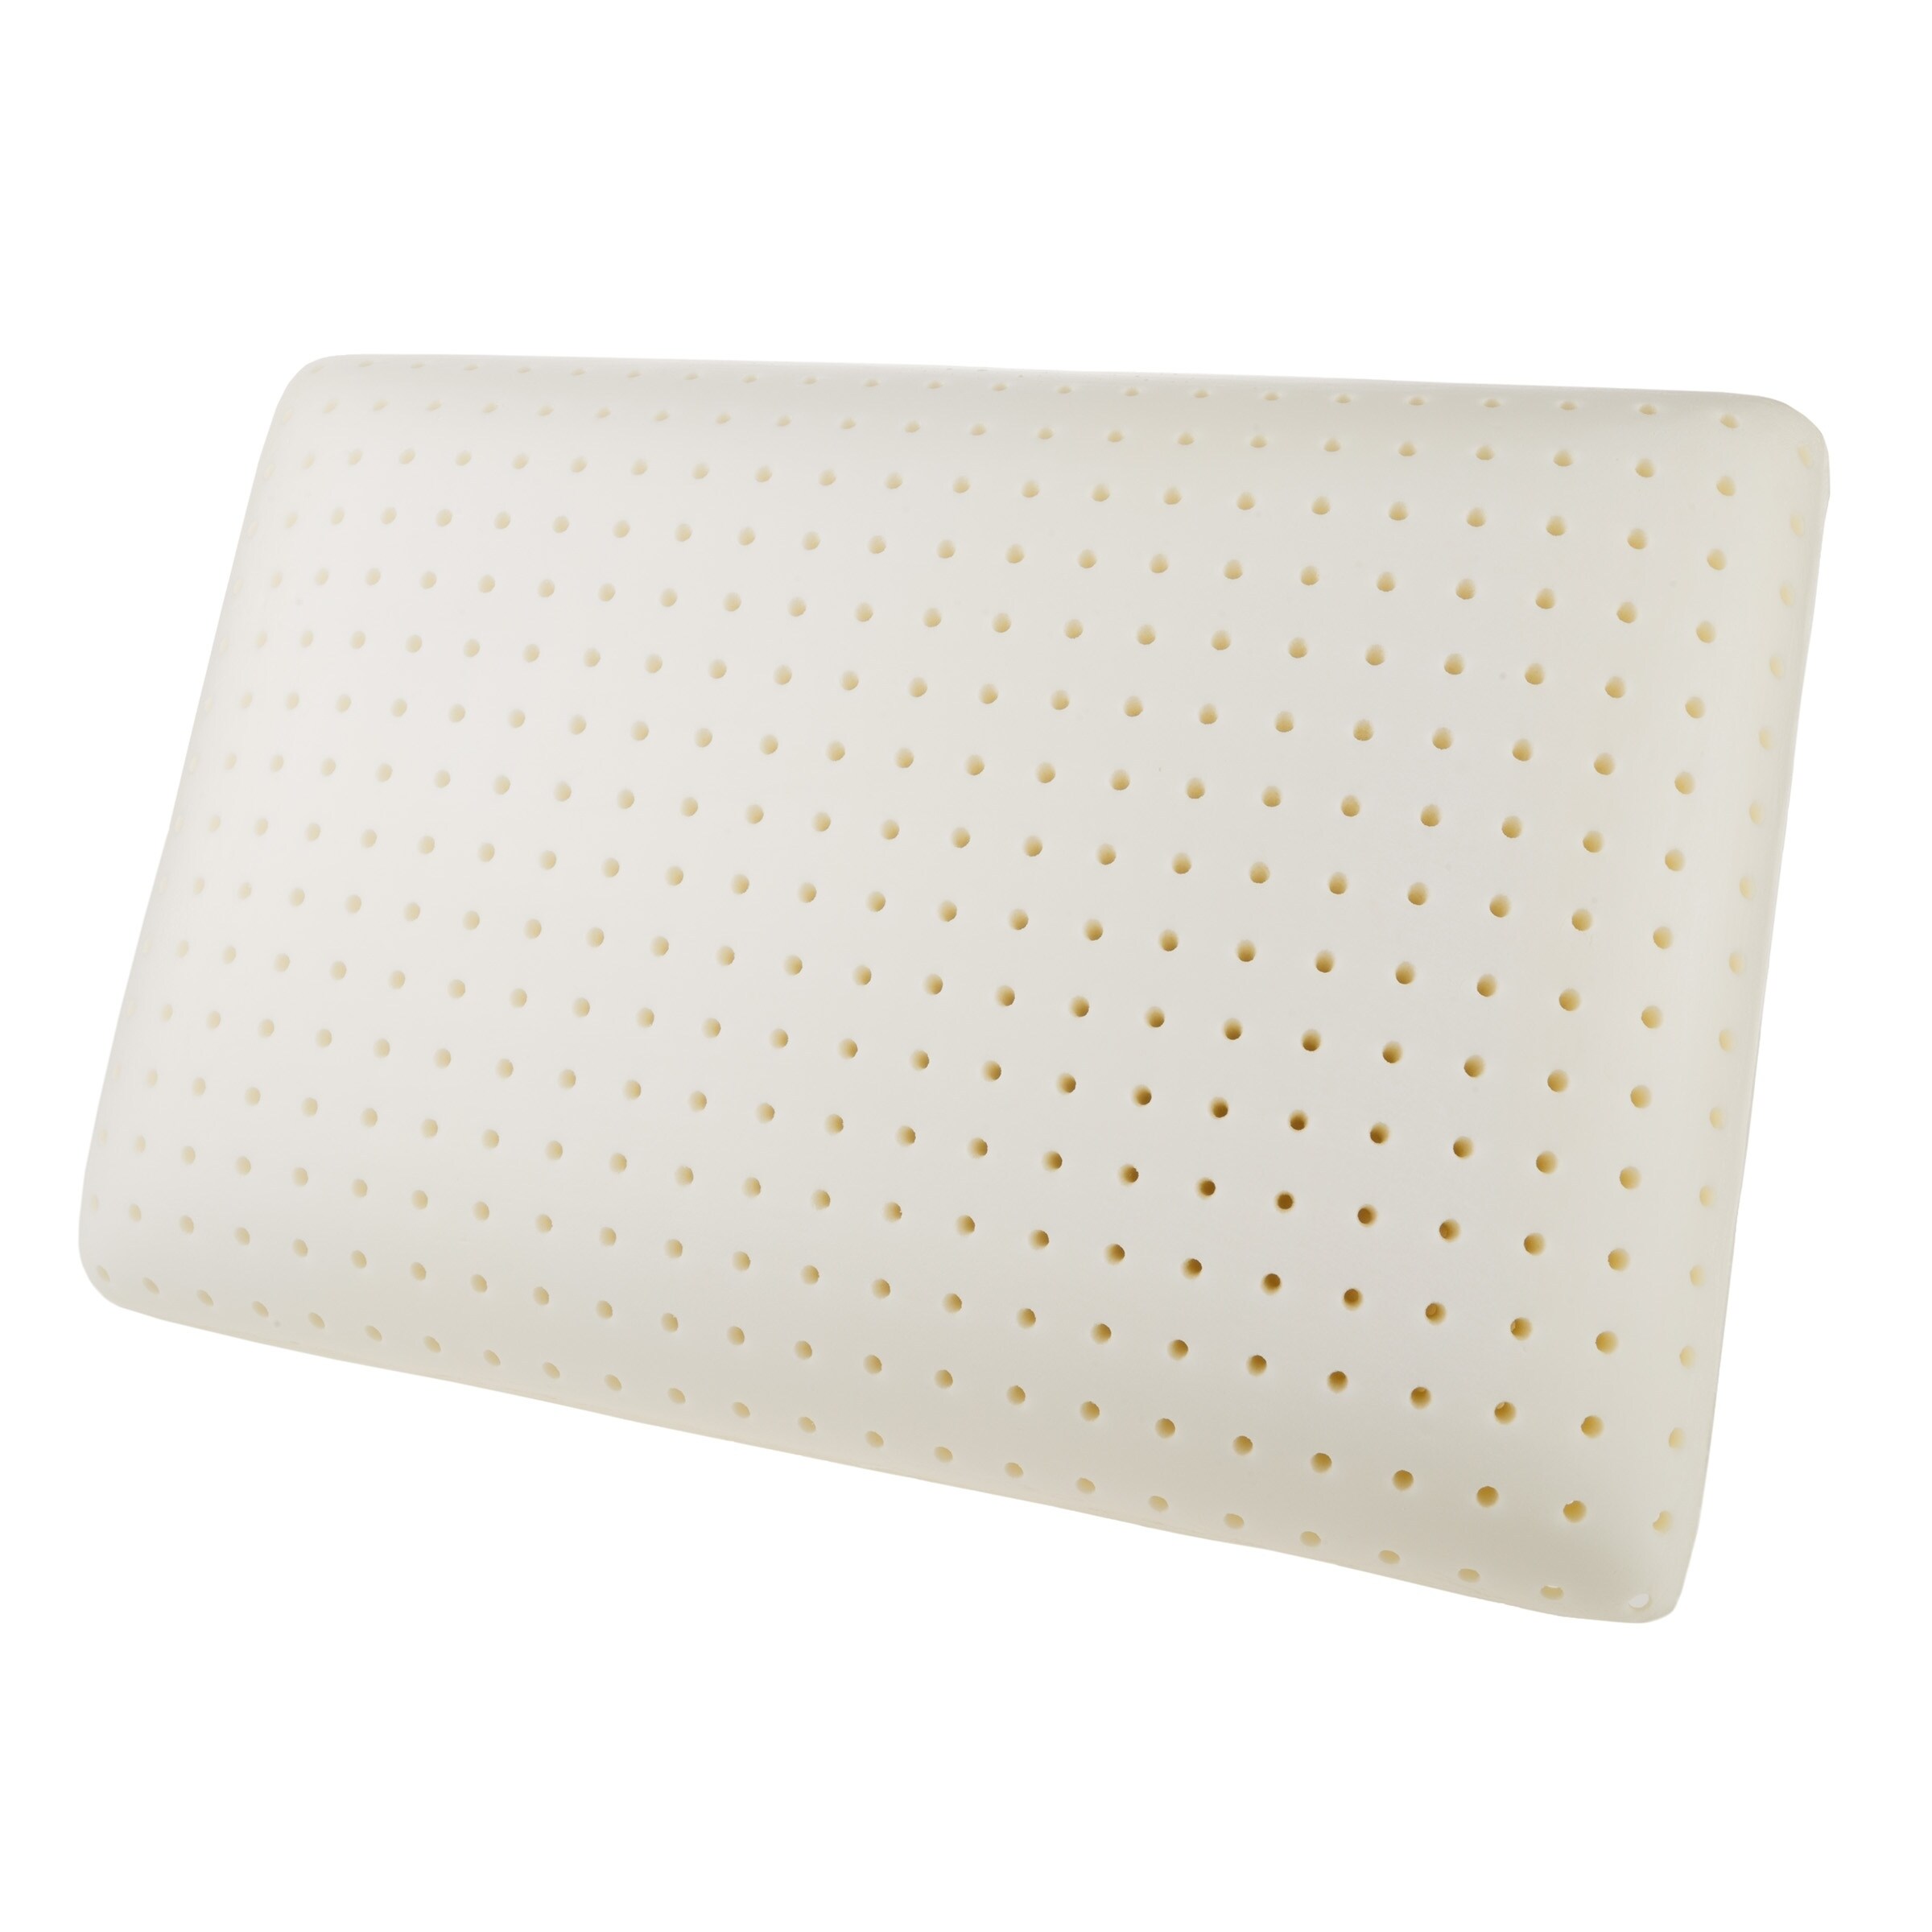 foam pillow with holes